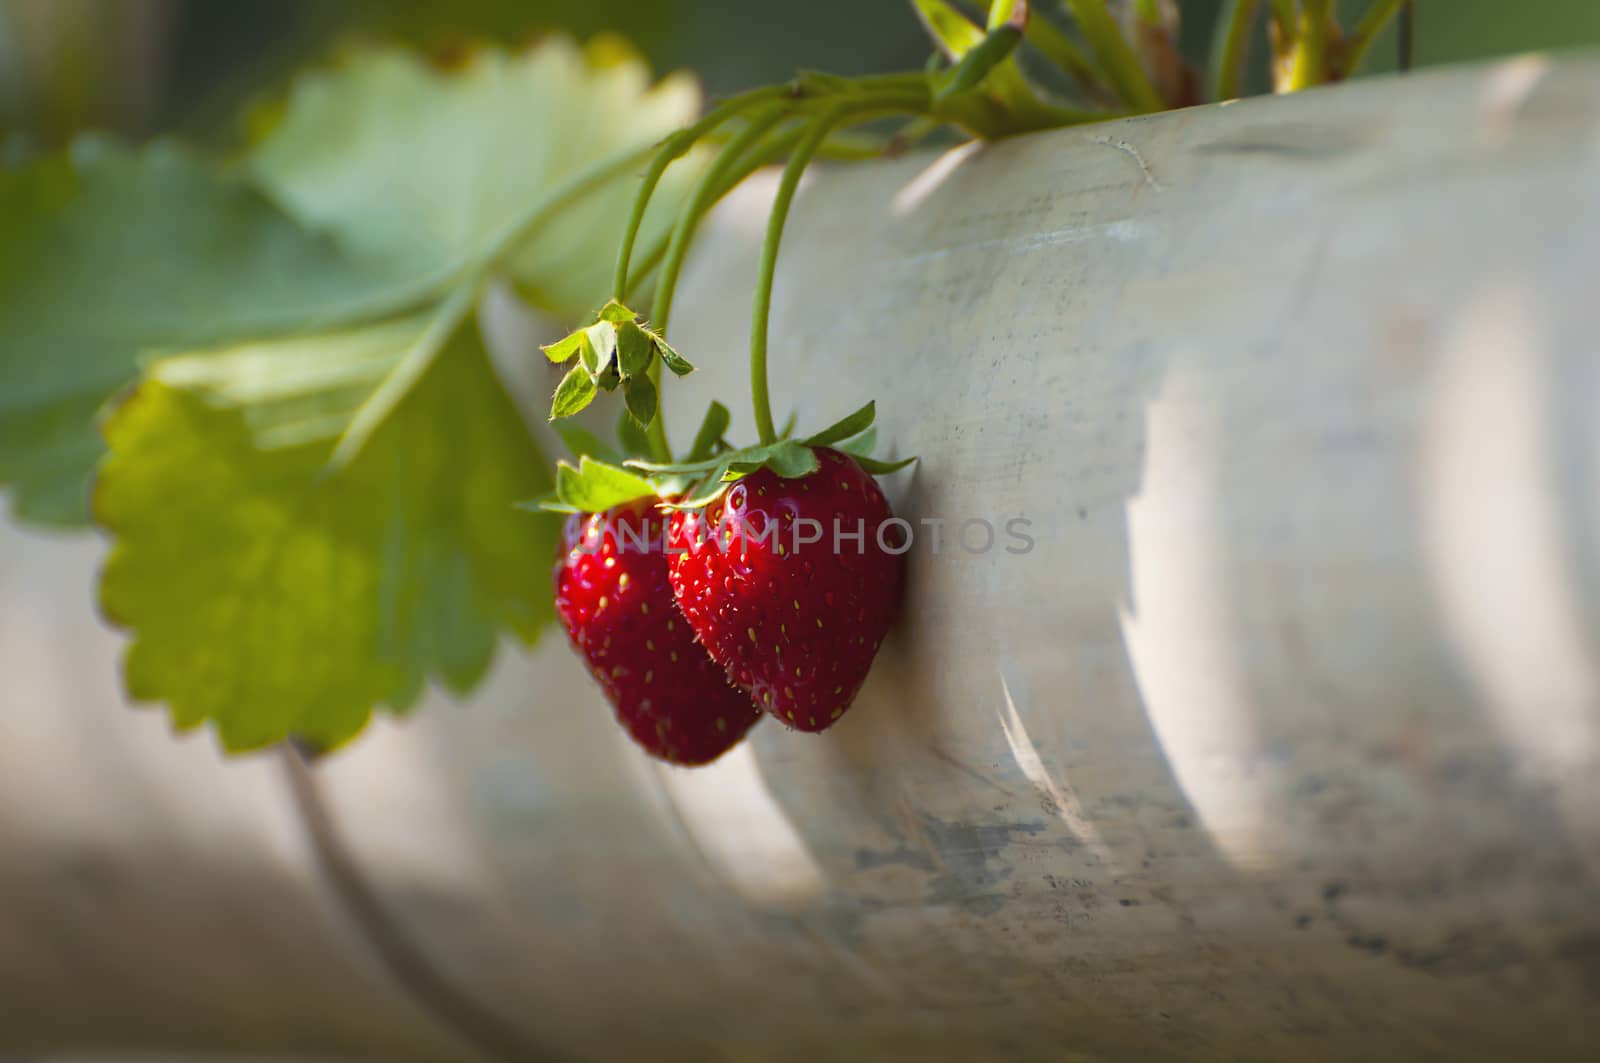 Fresh colorful red ripe strawberry with green leaves growing in bamboo tray - fresh clean fruit background concept